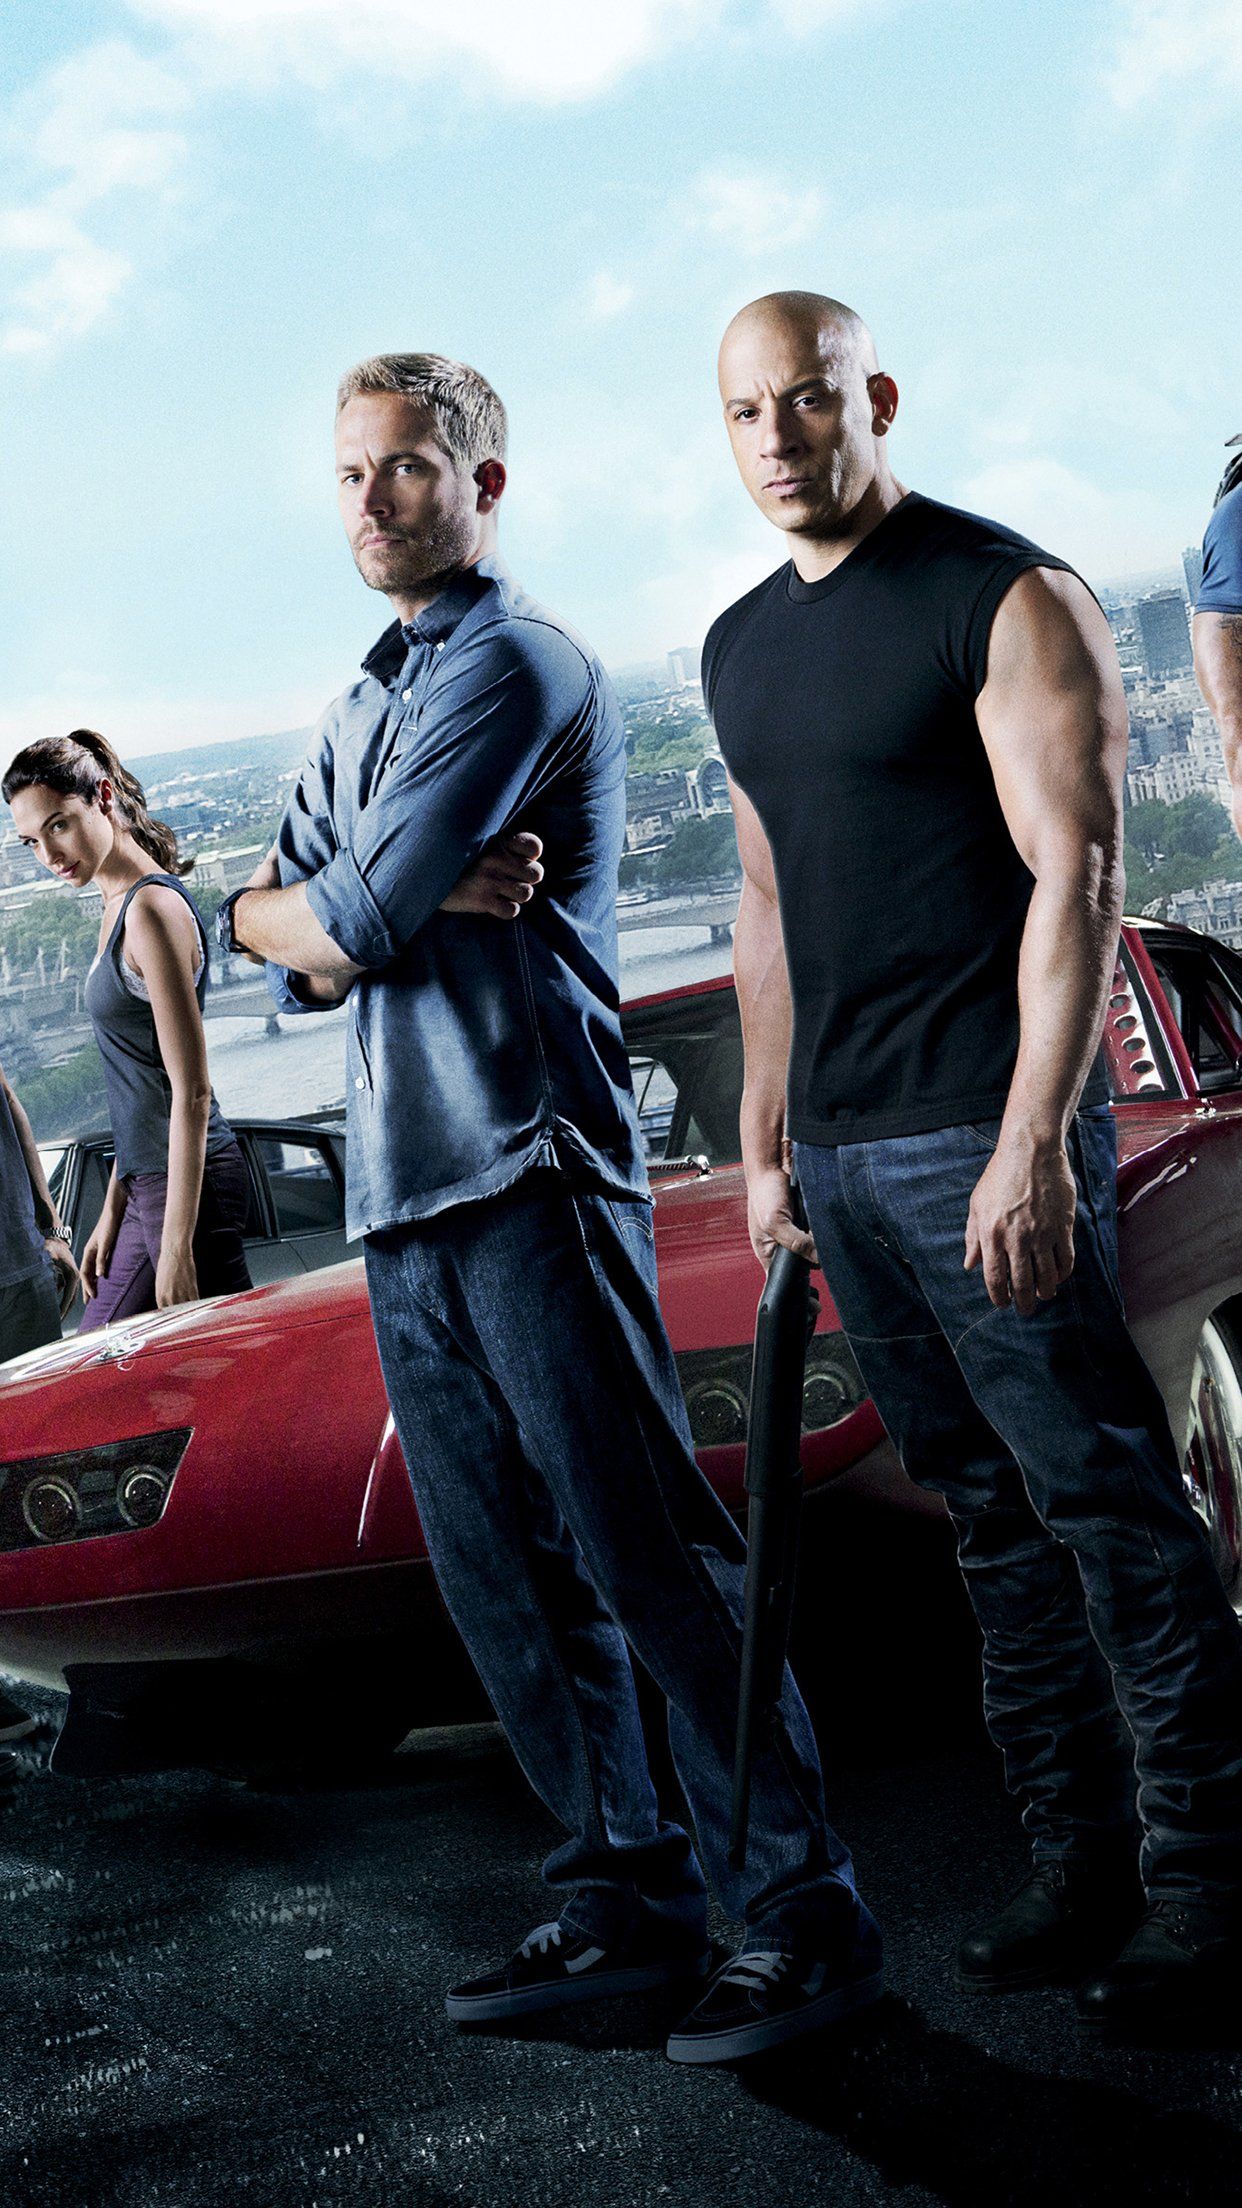 Free download Fast Furious 6 Wallpaper for iPhone X 8 7 6 Download [1242x2208] for your Desktop, Mobile & Tablet. Explore Fast 8 Wallpaper iPhone. Fast 8 Wallpaper iPhone, iPhone 8 Wallpaper, IPhone 8 Wallpaper